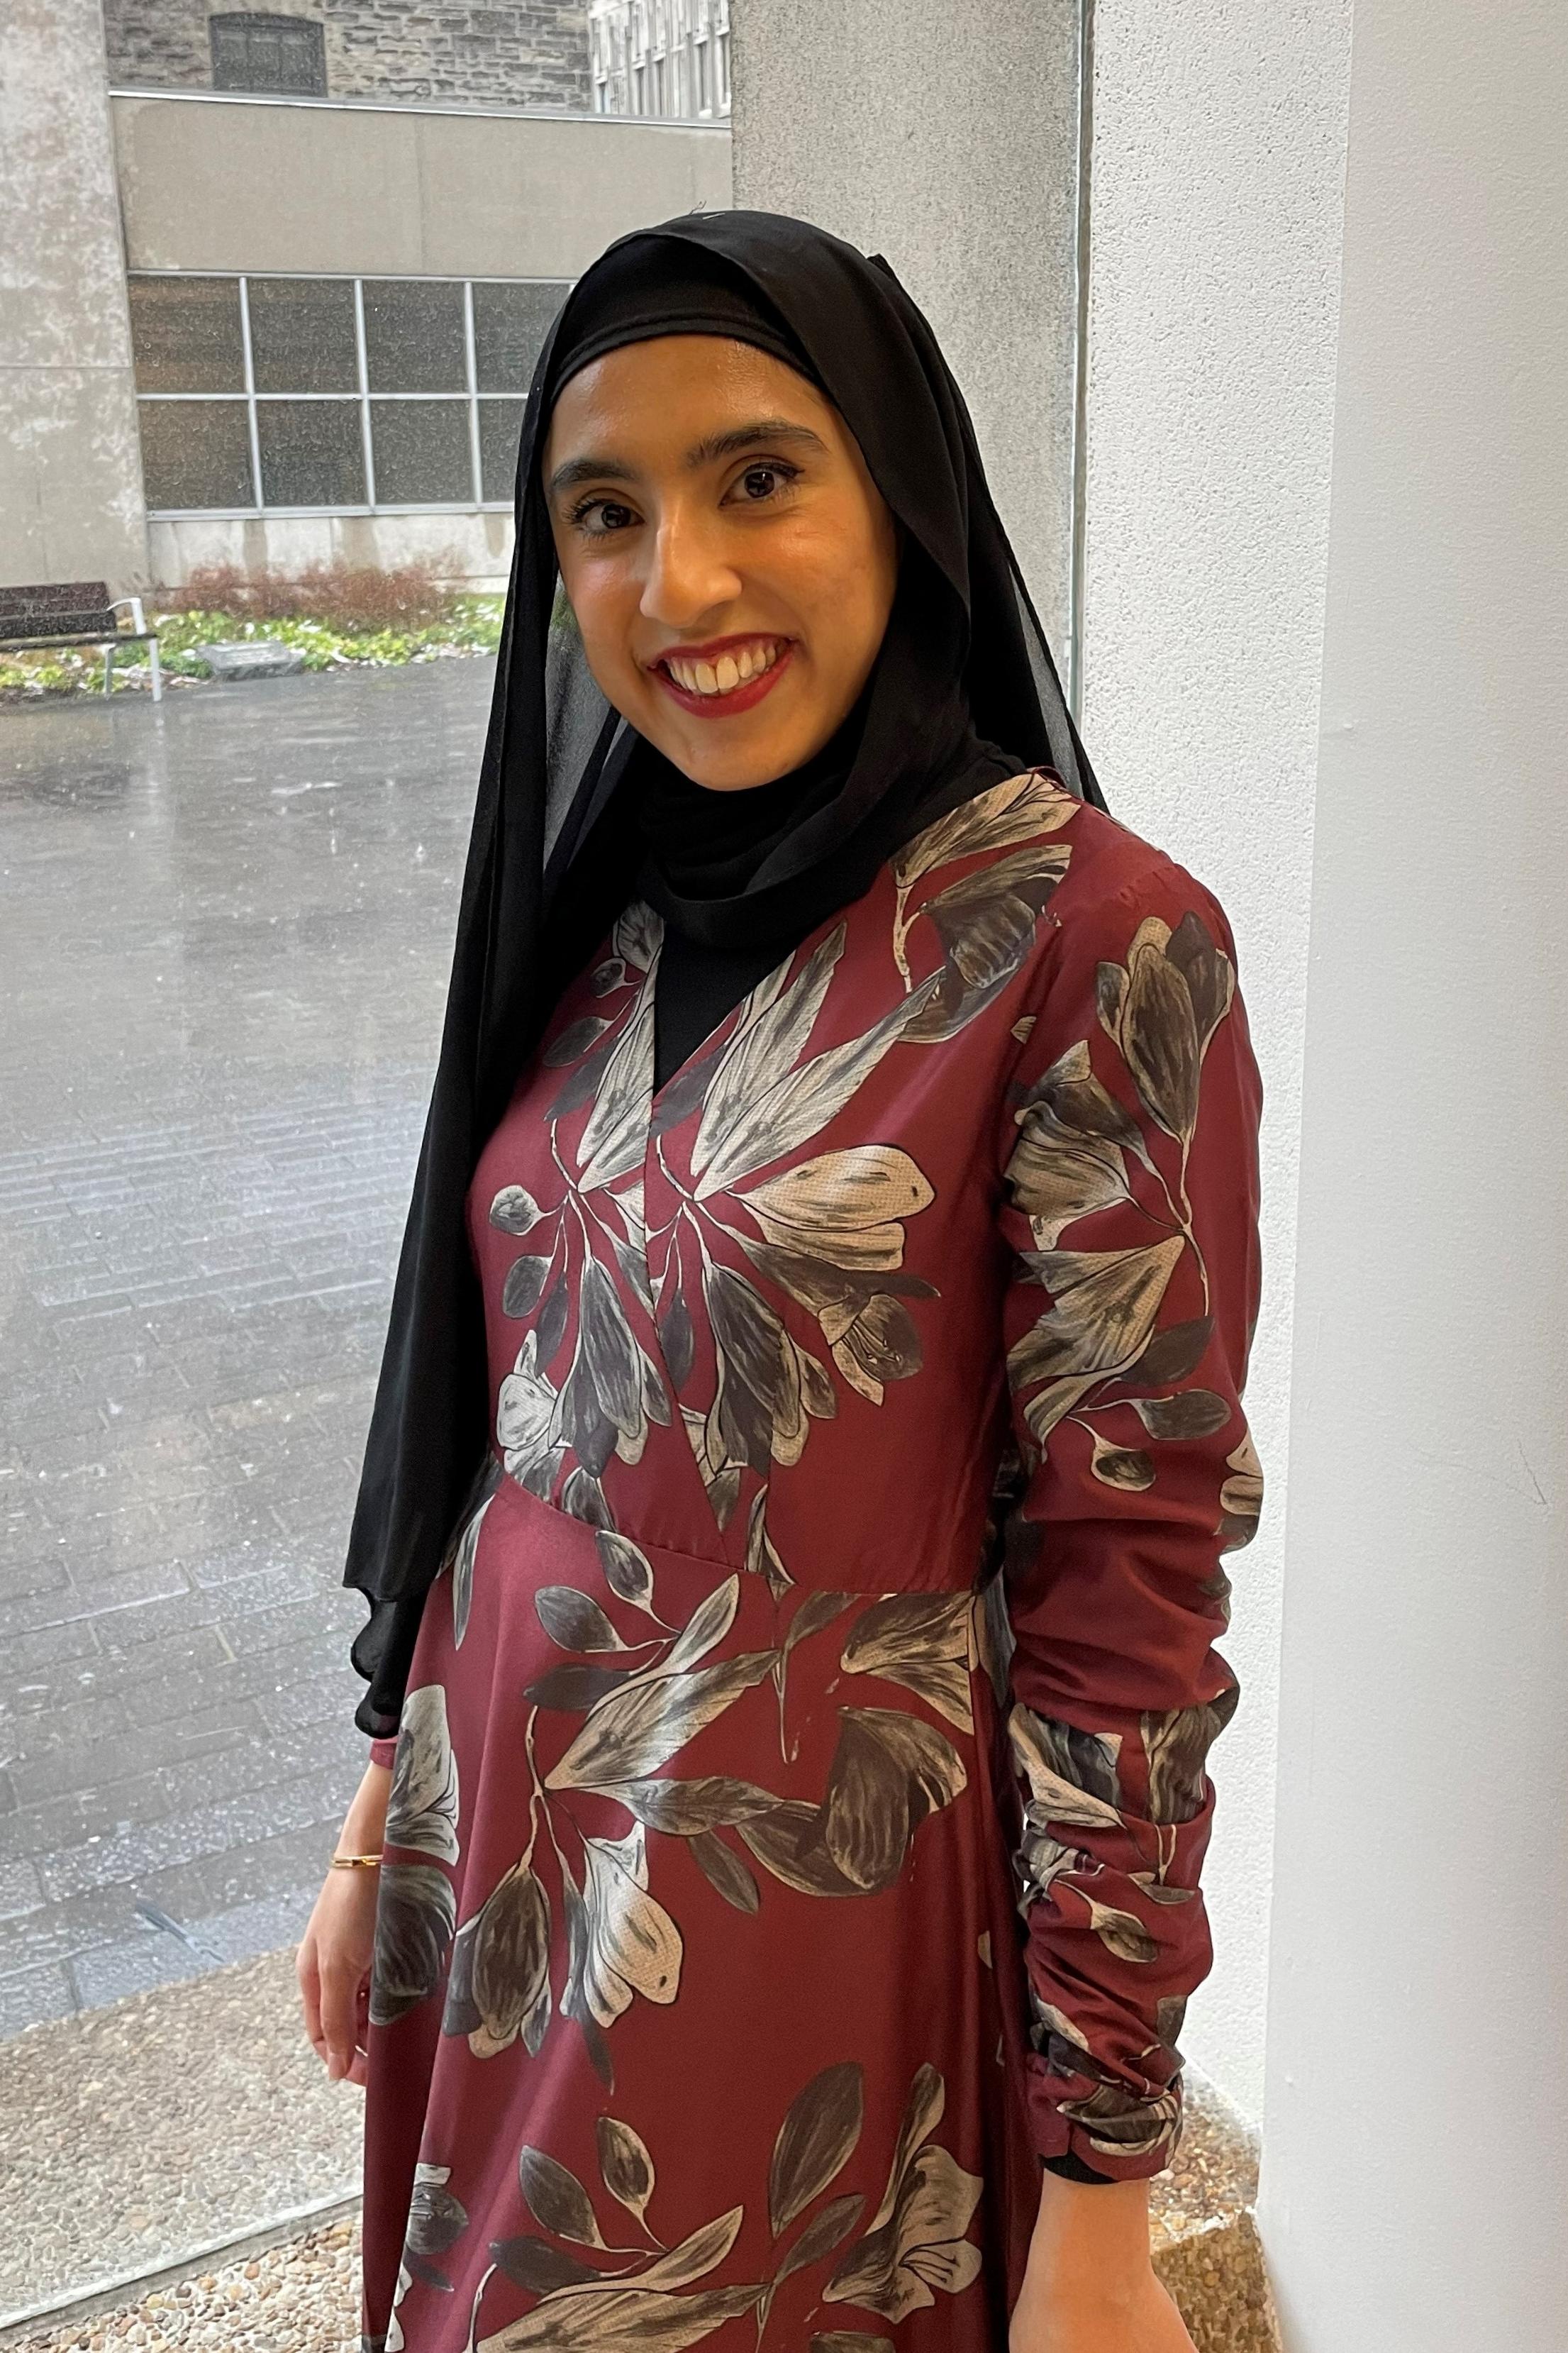 A photo of Laveeza. She is in a red floral dress and black hijab.